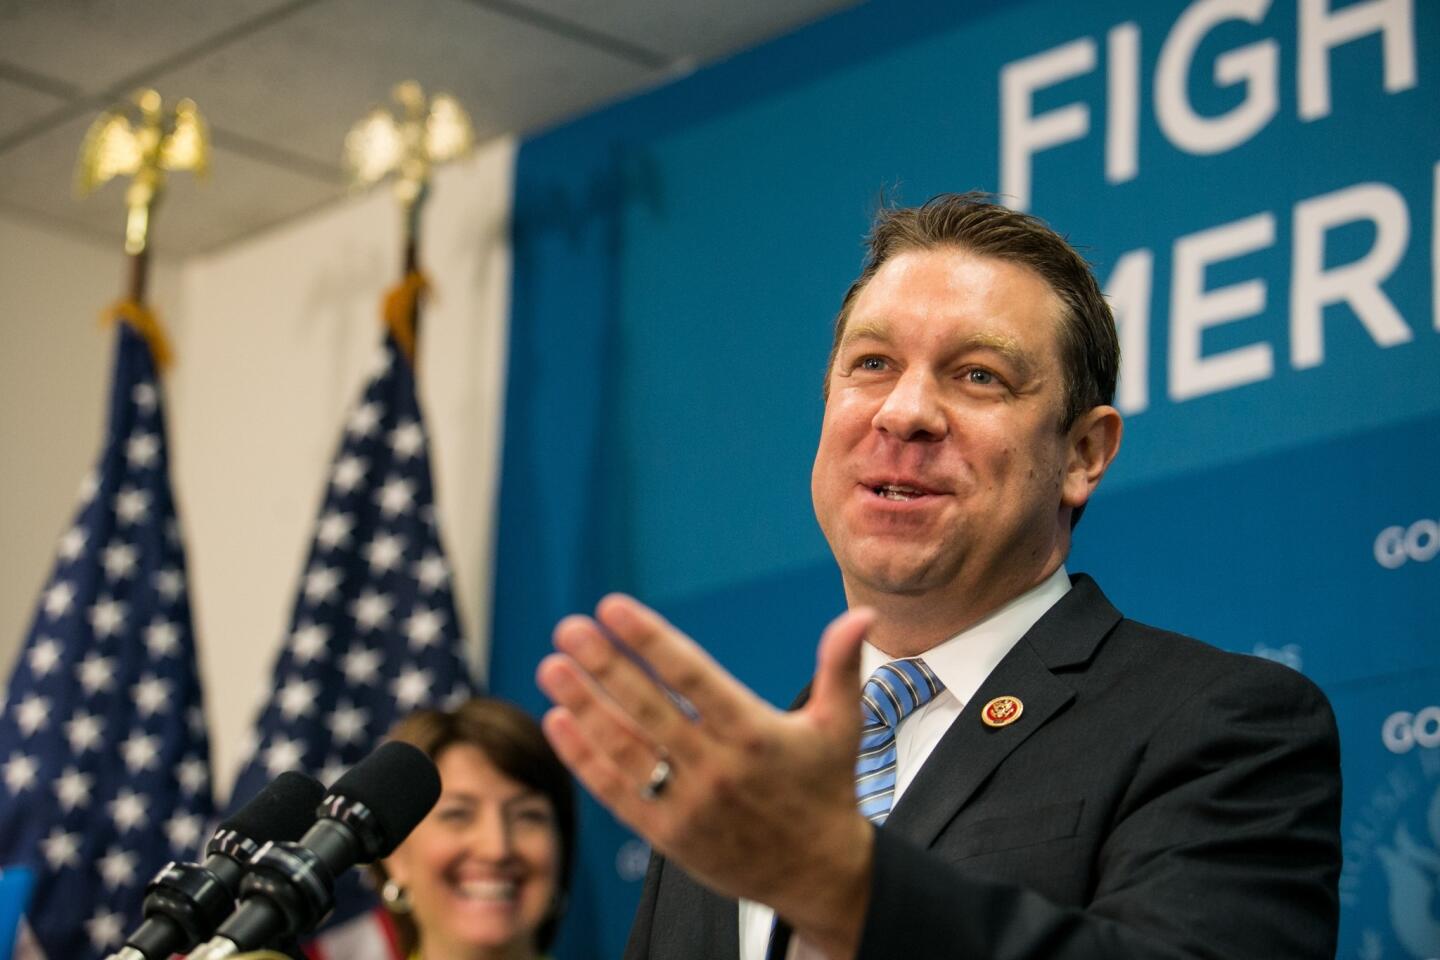 After pleading guilty to a charge of cocaine possession, Rep. Trey Radel (R-Fla.) announced he would resign from Congress. Initially, Radel planned to remain in his seat, but chose to step down amid GOP calls for his resignation and a House Ethics Committee probe.